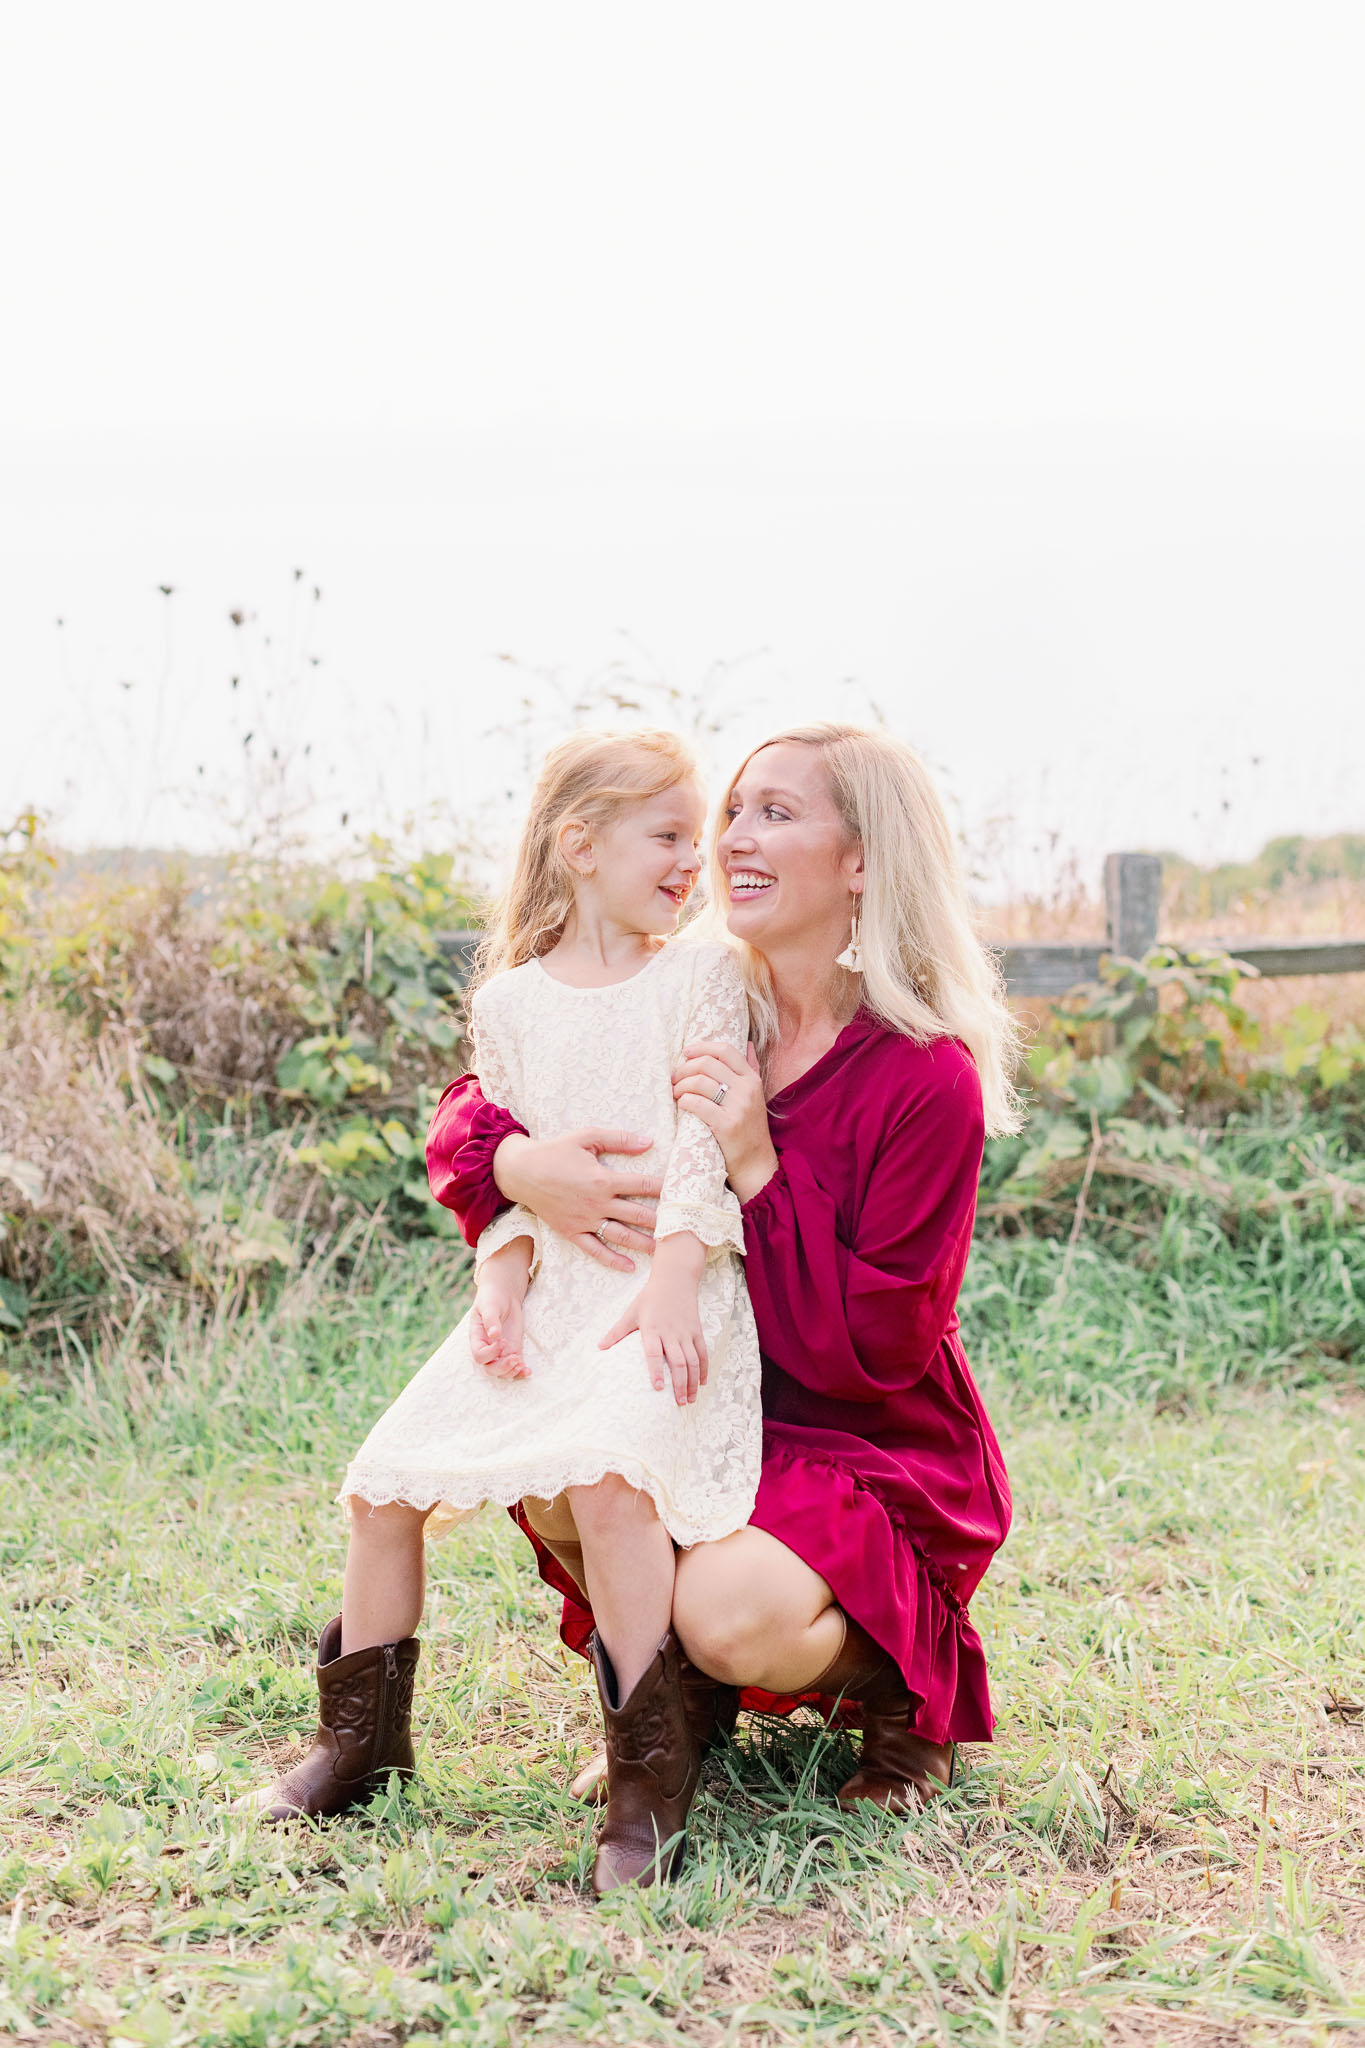 Chicago Lifestyle Family Photographer – St Charles Fall Family Photos-36